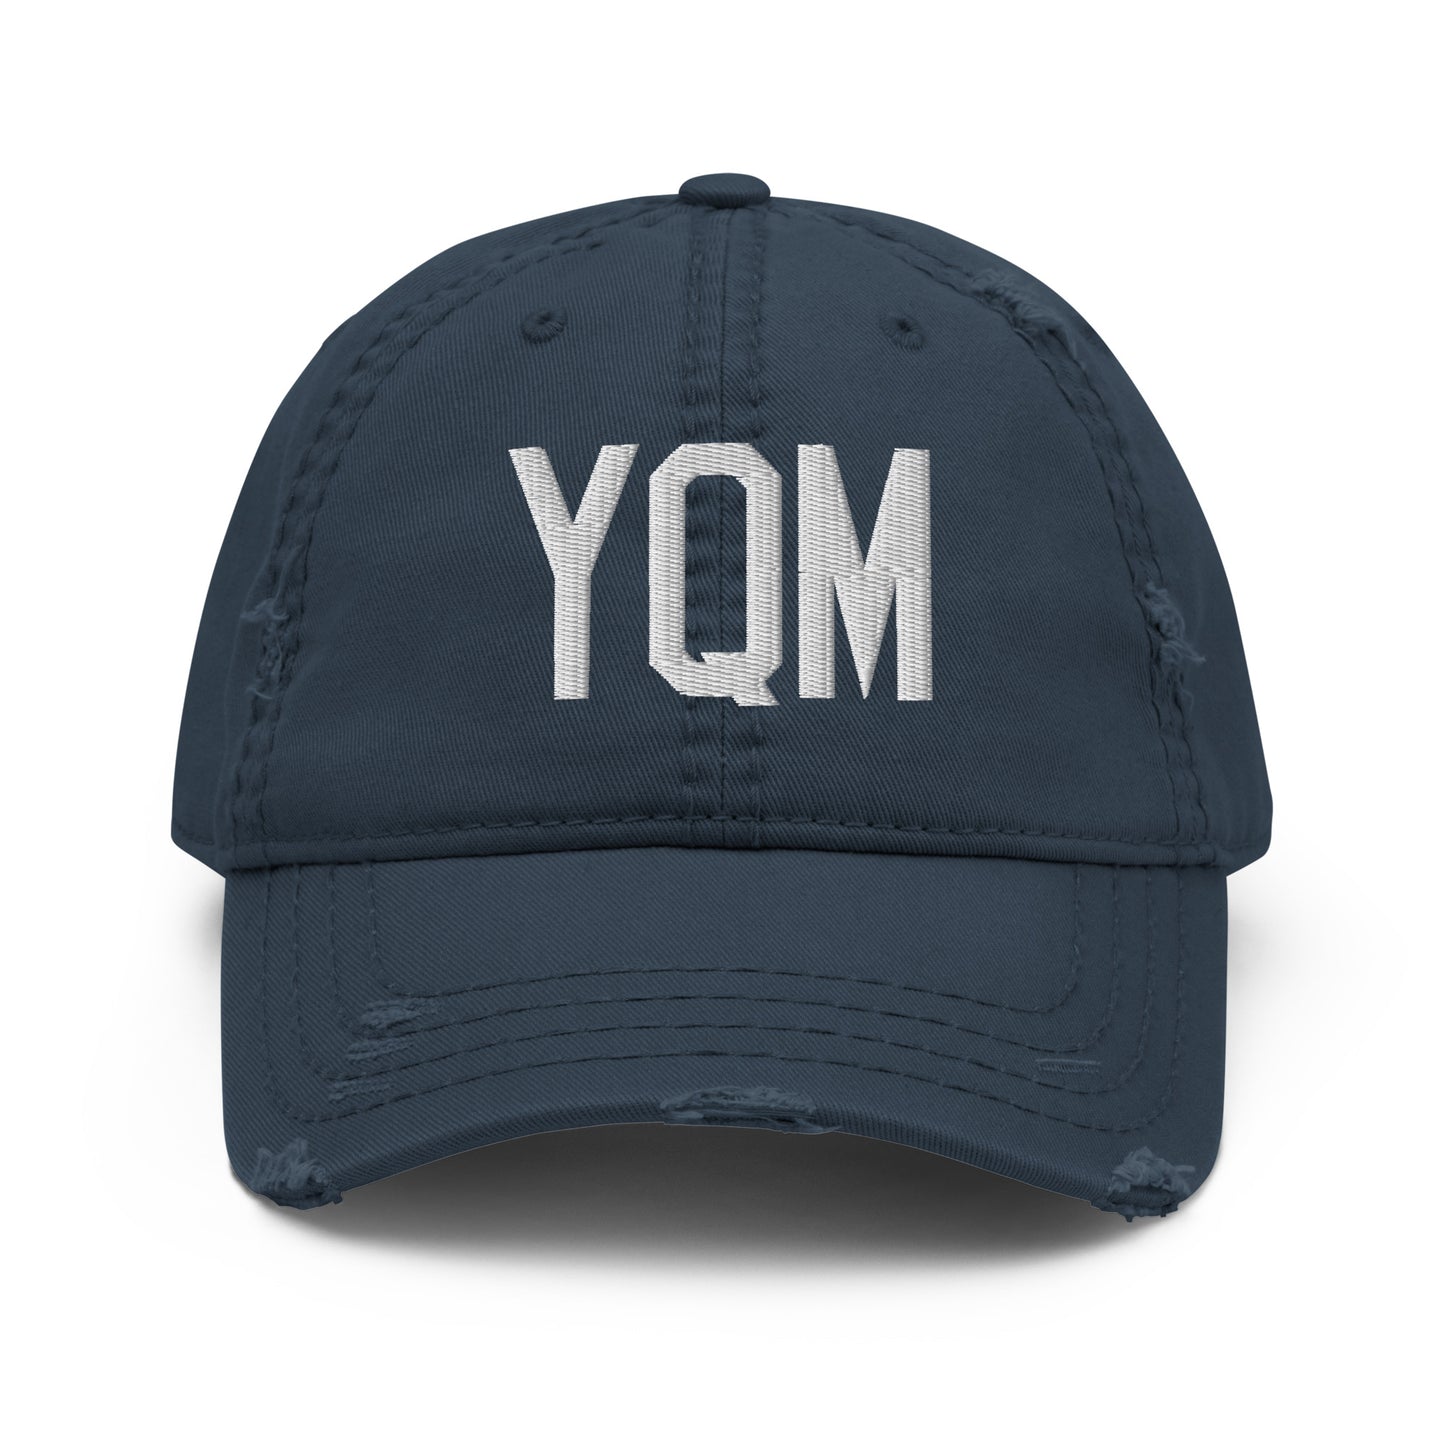 Airport Code Distressed Hat - White • YQM Moncton • YHM Designs - Image 13